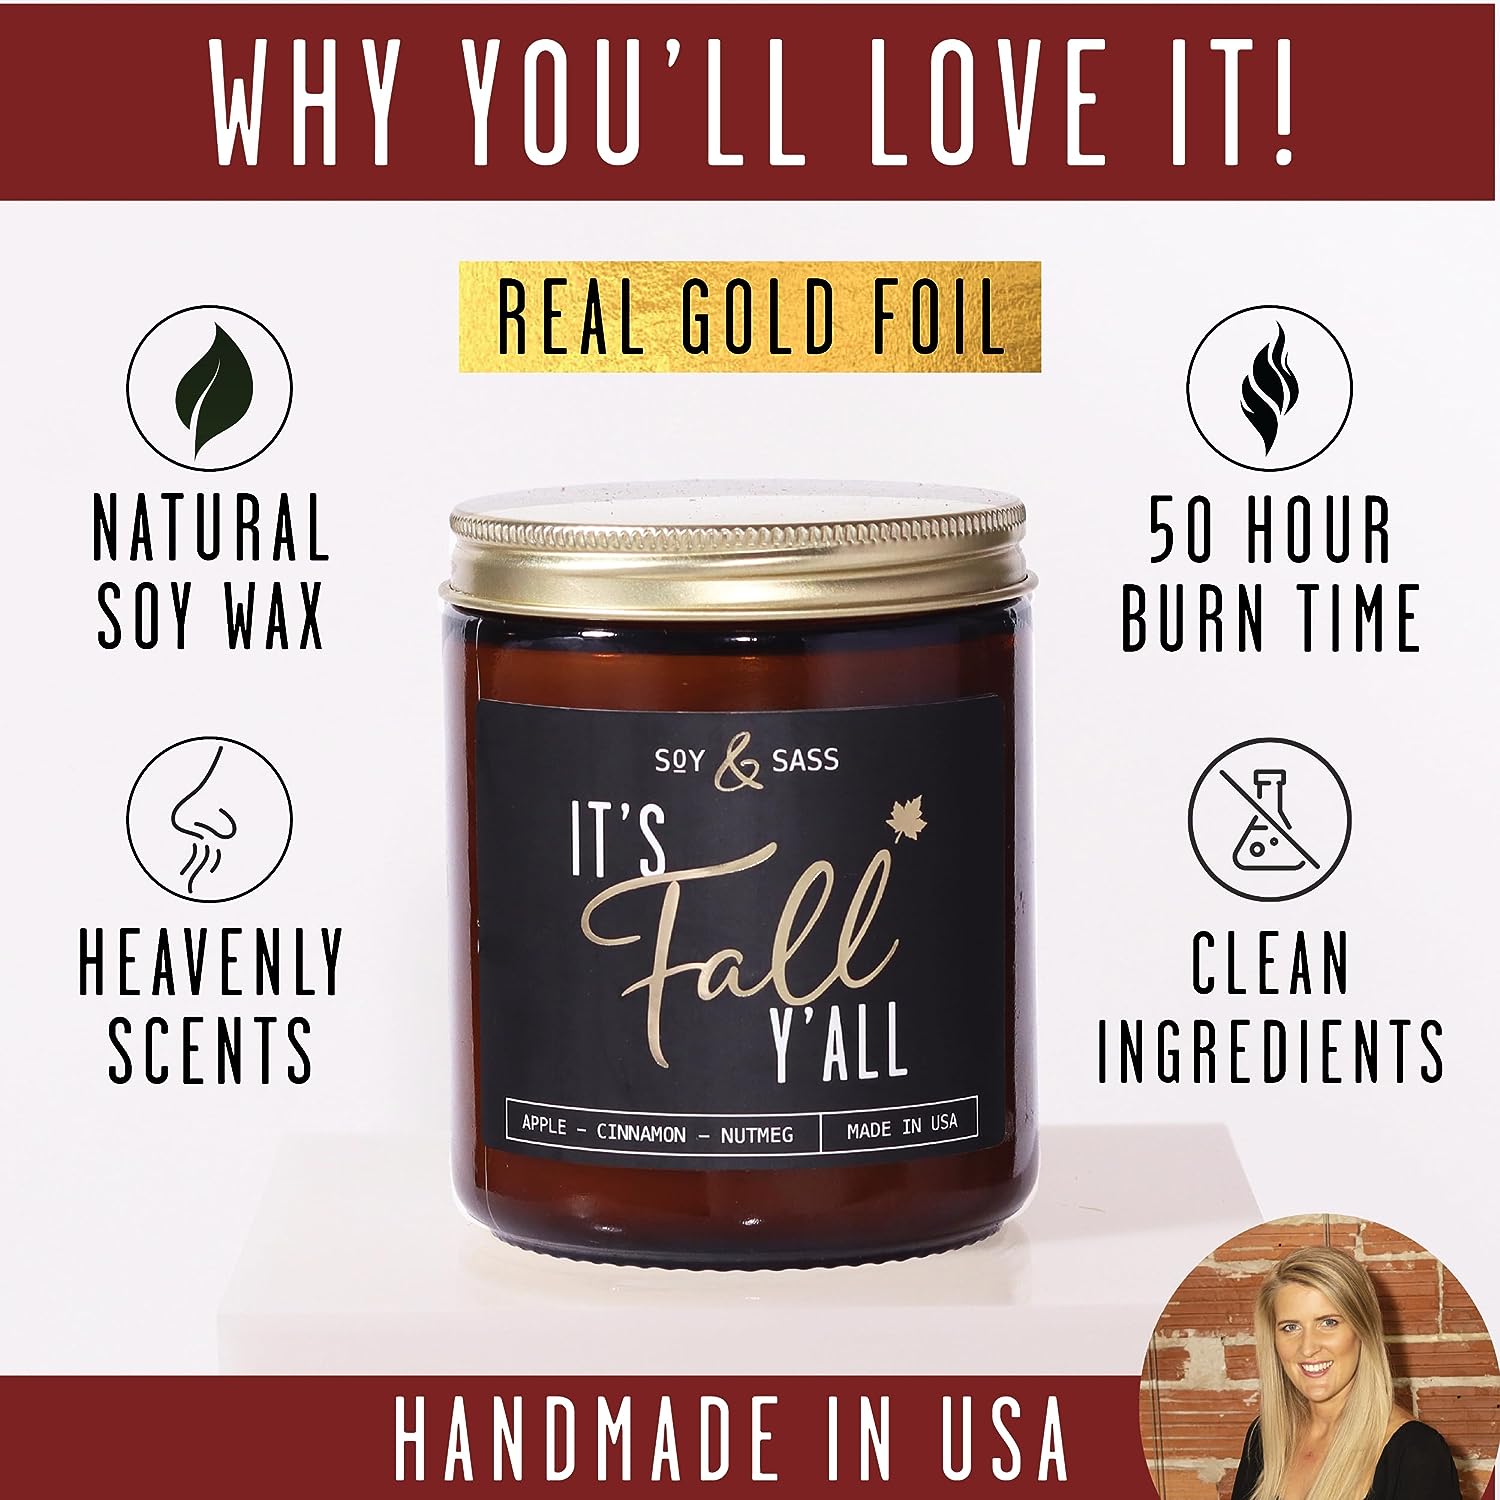 Soy Wax Candle: Apple Cinnamon & Nutmeg I Infused with Essential Oils I 'It's Fall Yall' Text | Cozy Cute Fall Décor Fall Gifts I 9Oz Jar I 50Hr Burn I Made in USA